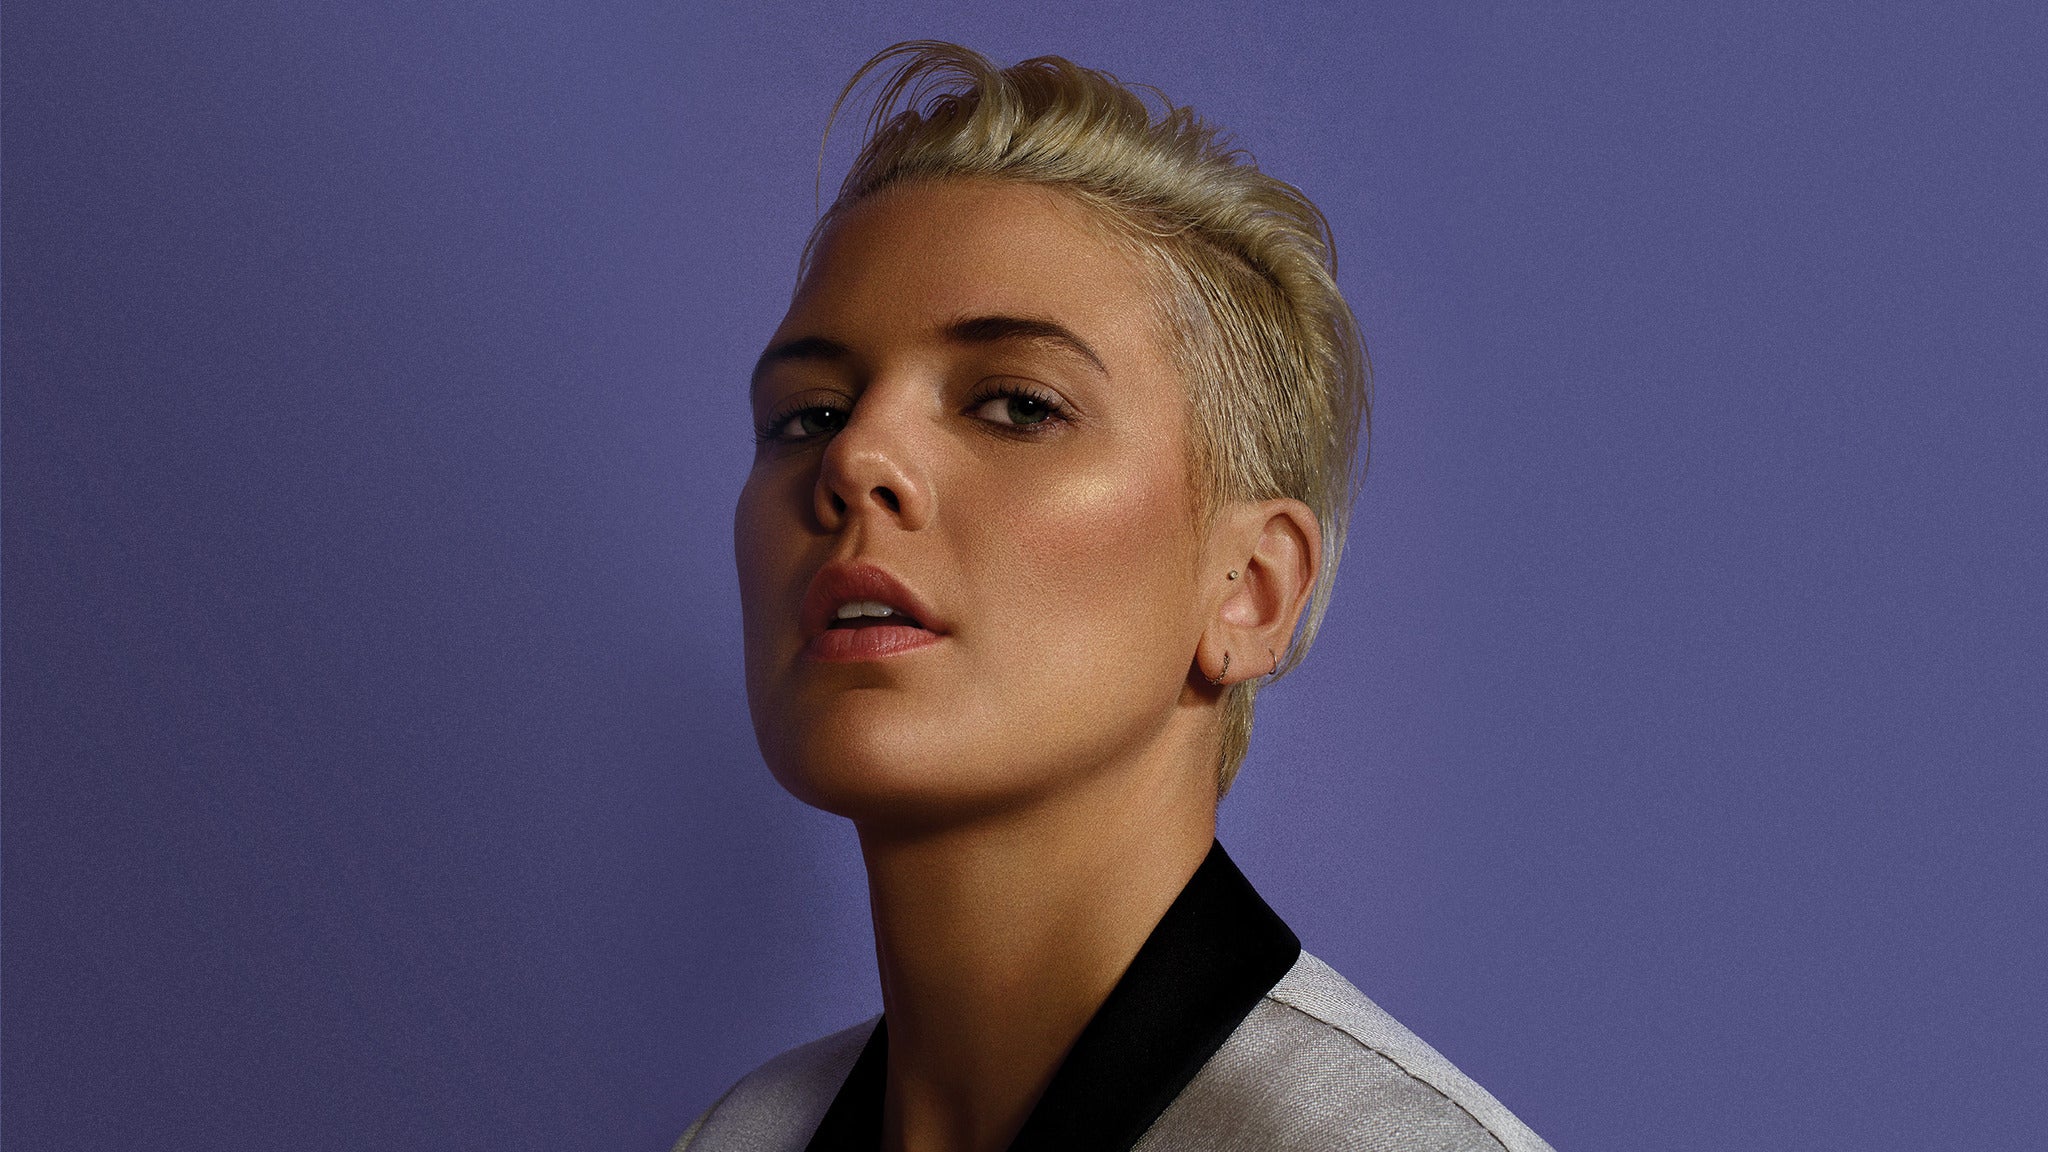 Betty Who in Ft Lauderdale promo photo for Spotify presale offer code